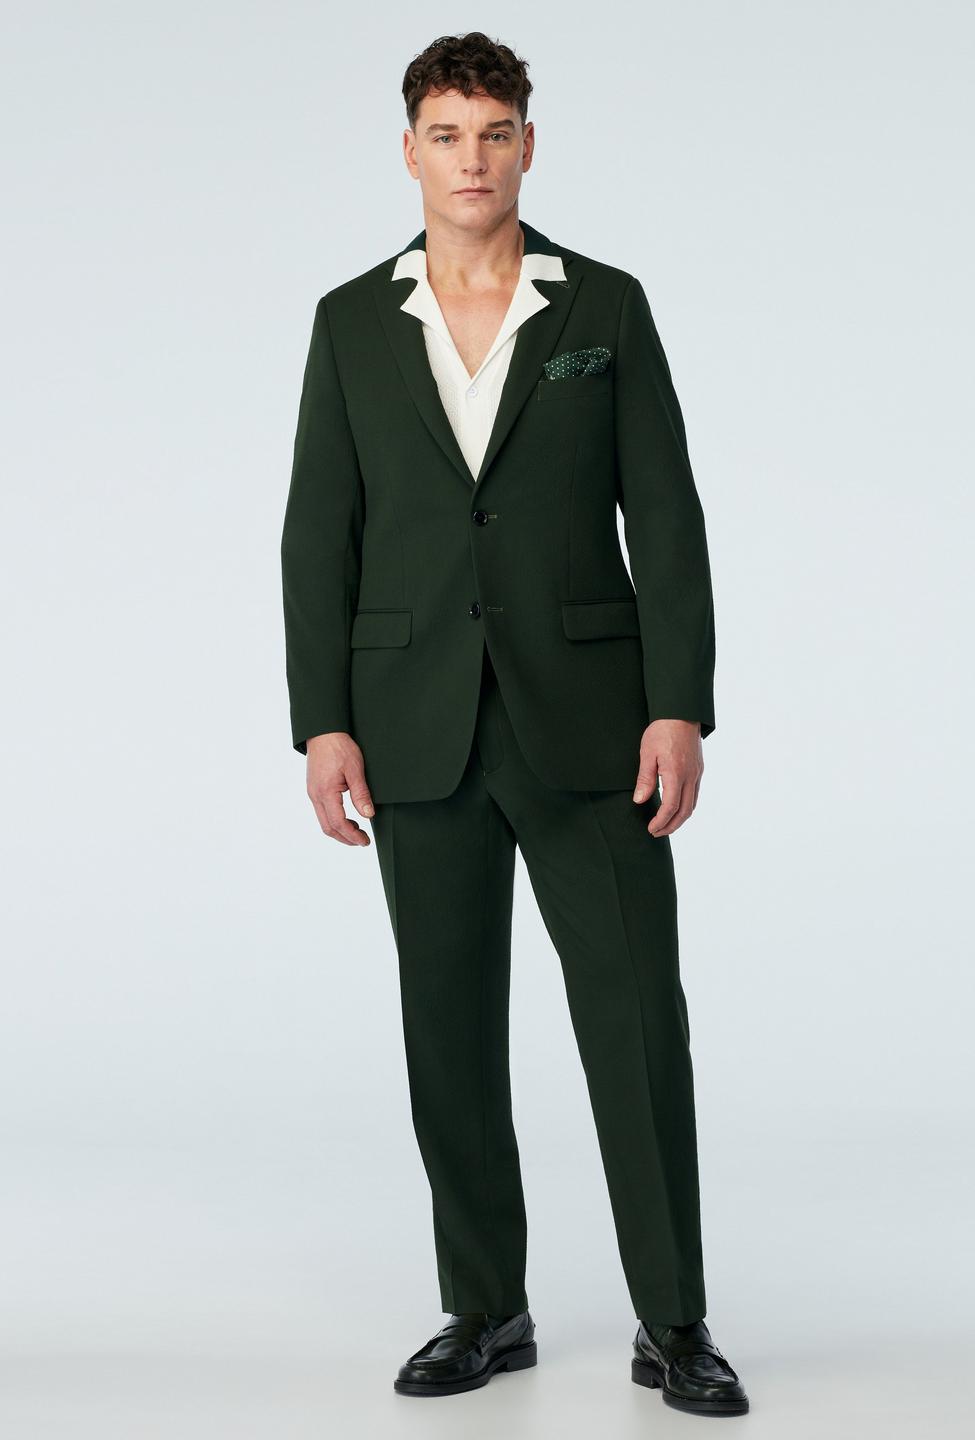 Green suit - Stapleford Solid Design from Seasonal Indochino Collection